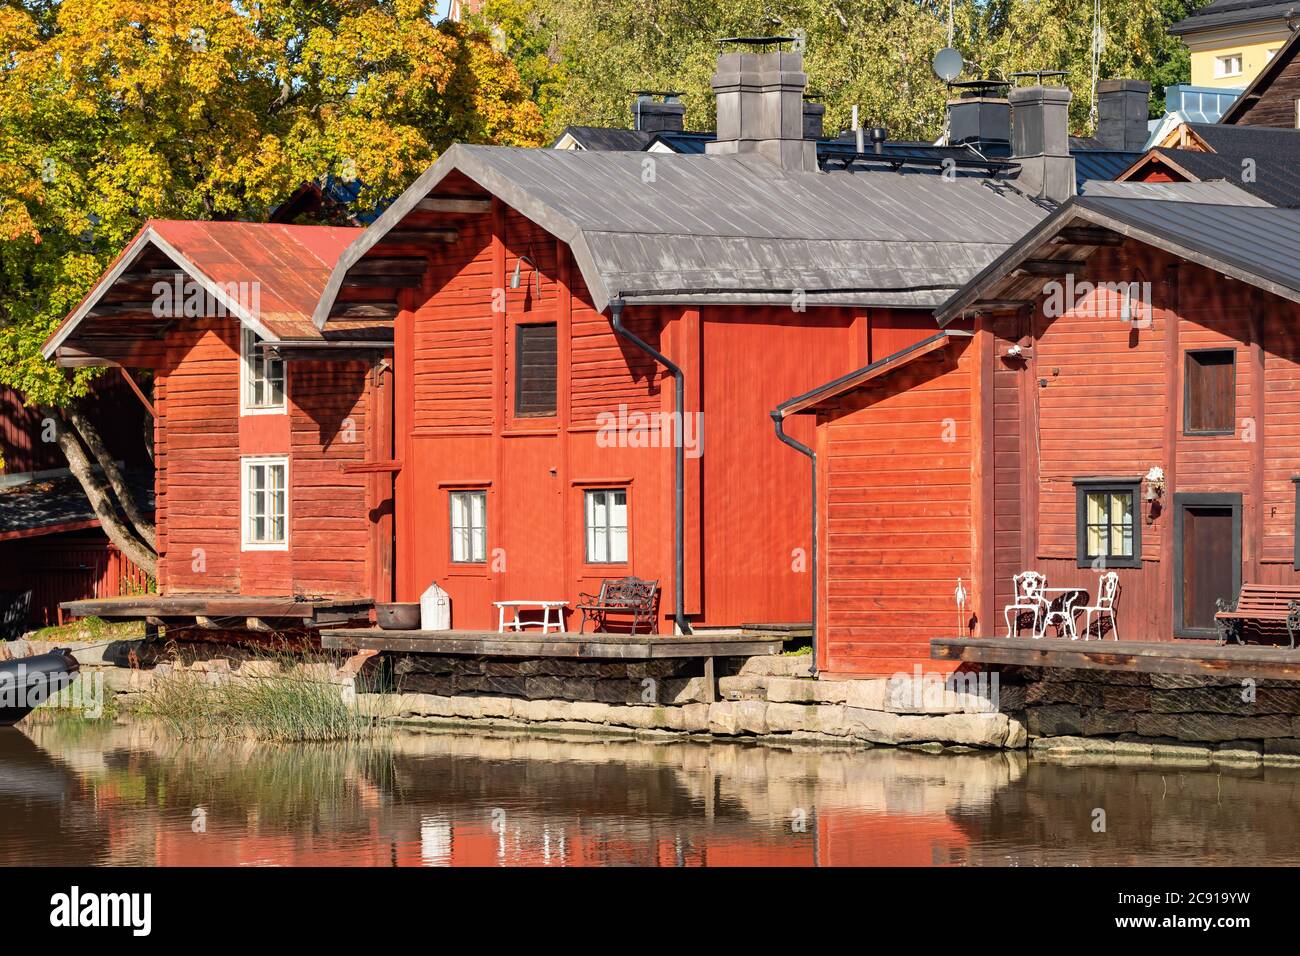 Old wooden red houses in old town of Porvoo, Finland Stock Photo